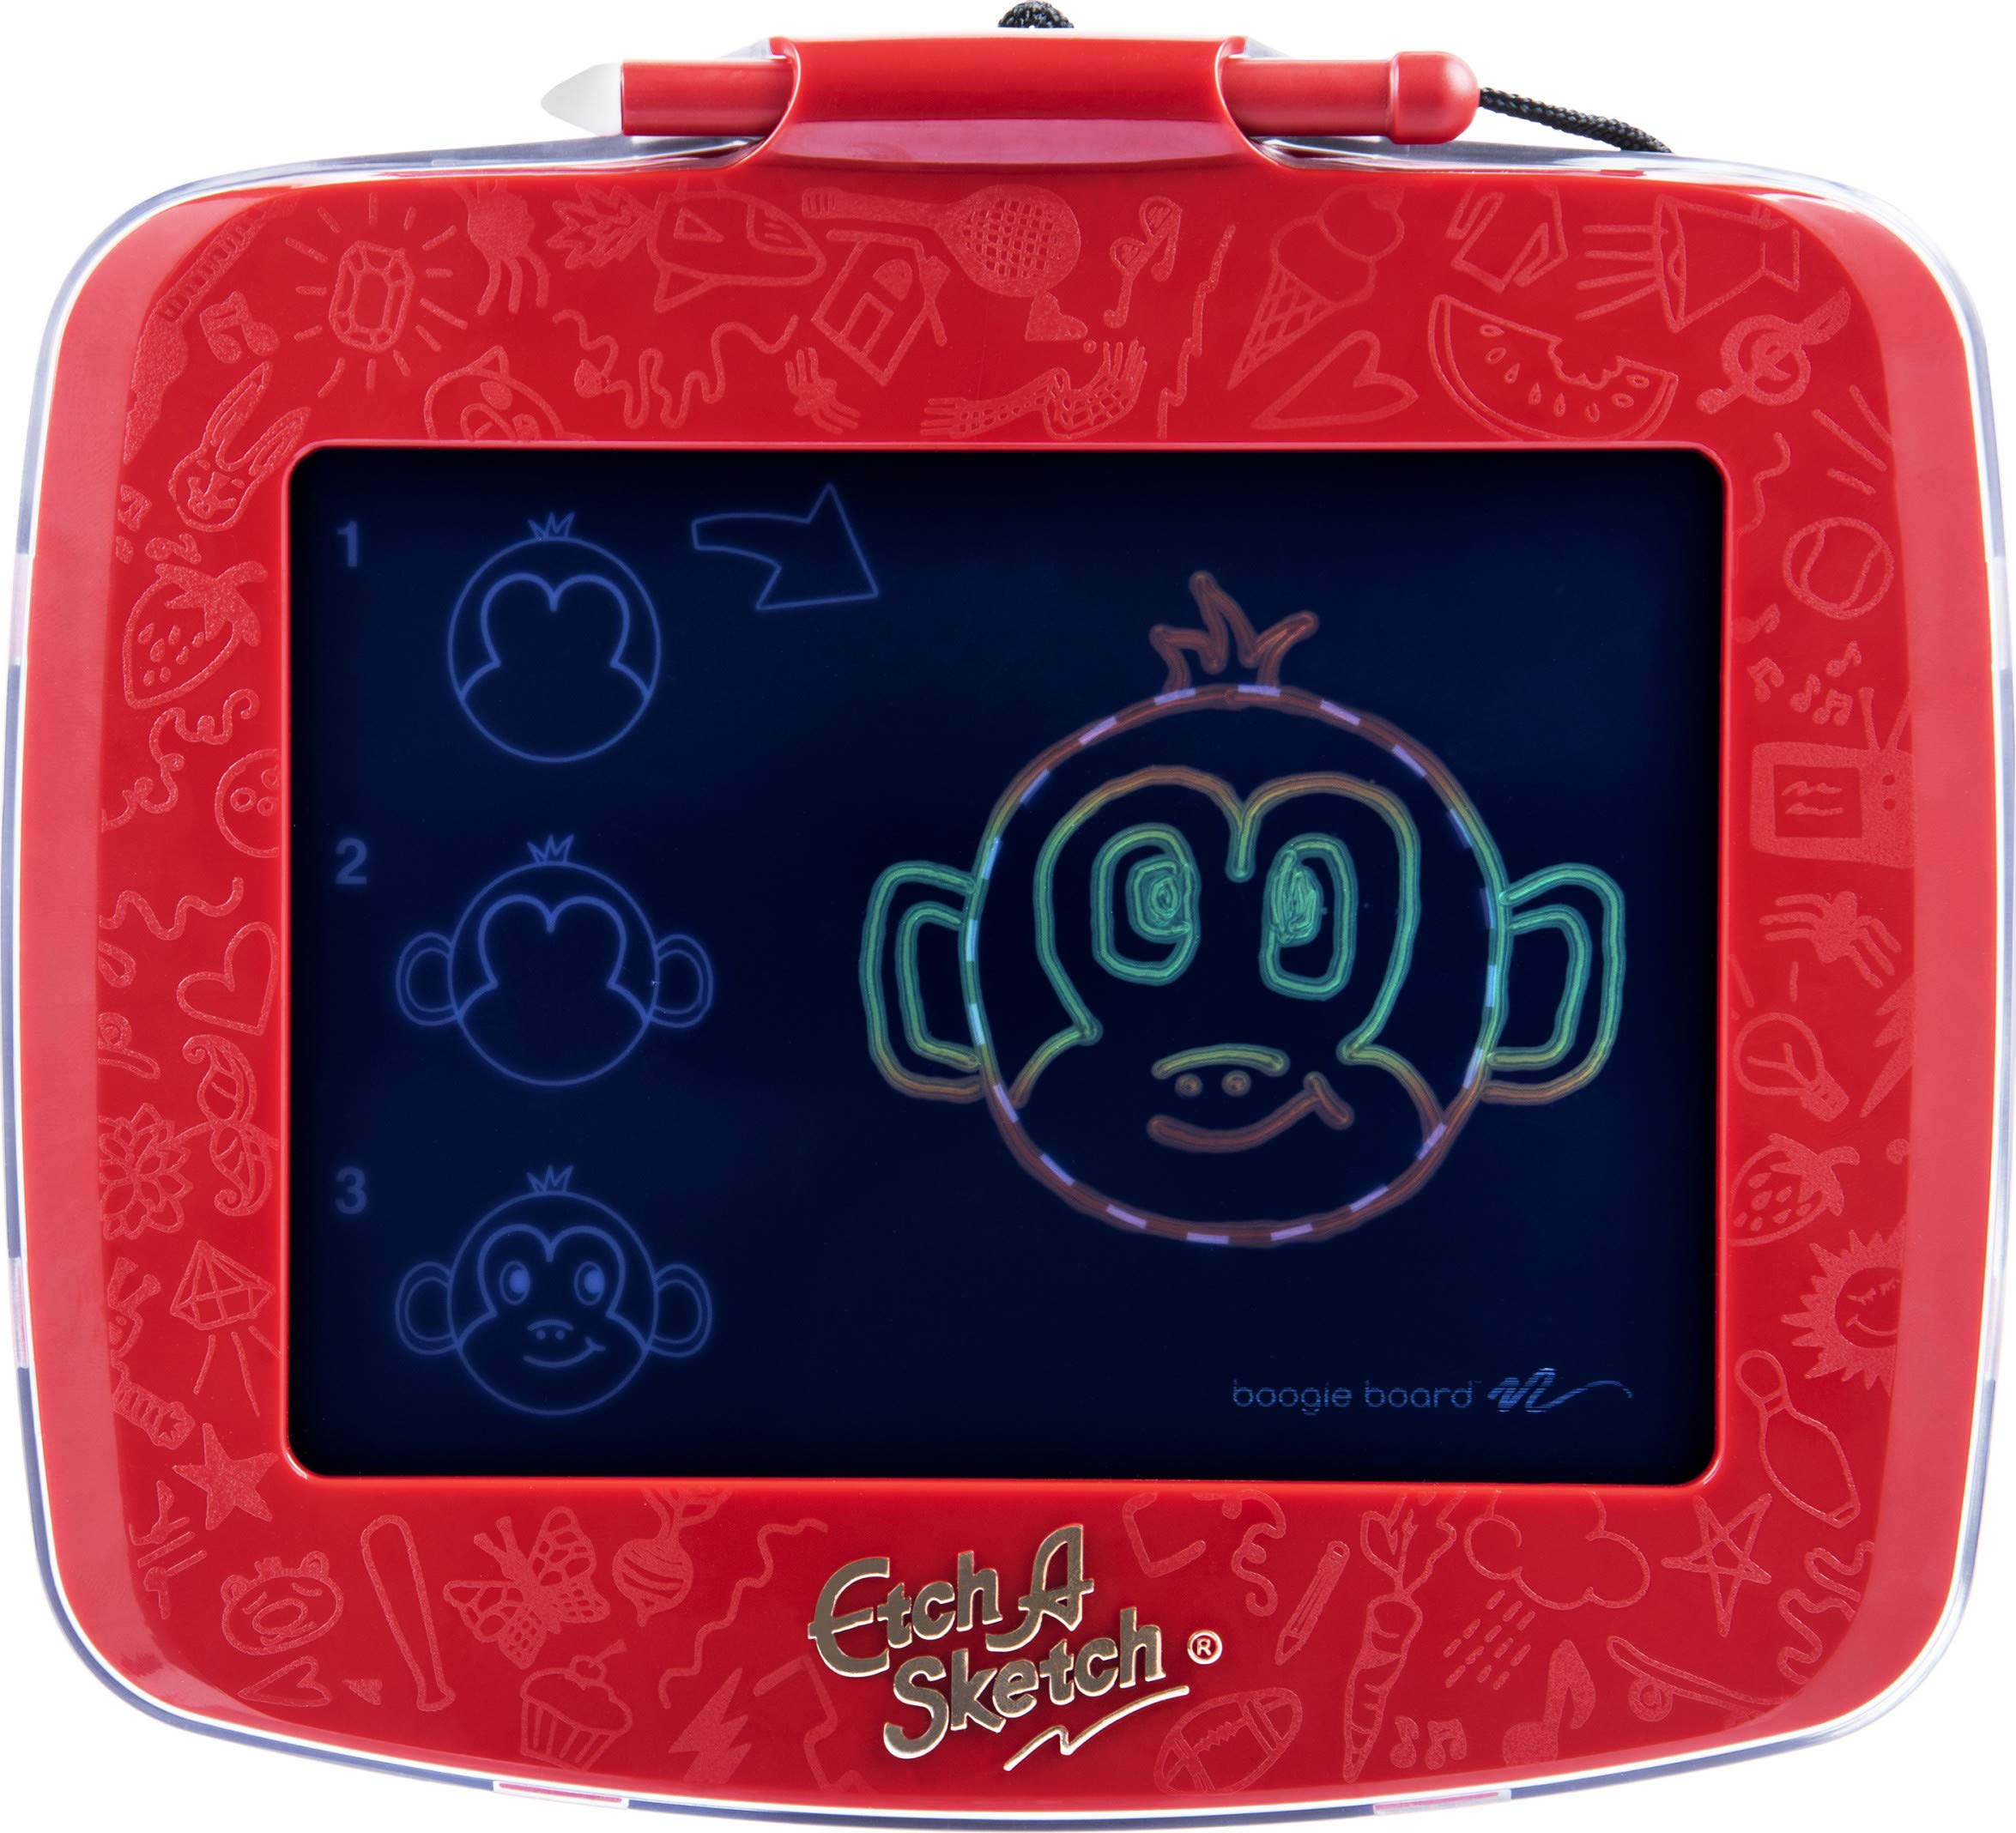 Etch A Sketch Freestyle, 2-in-1 Drawing and Tracing Pad with Magic Pen Stylus (Edition May Vary)